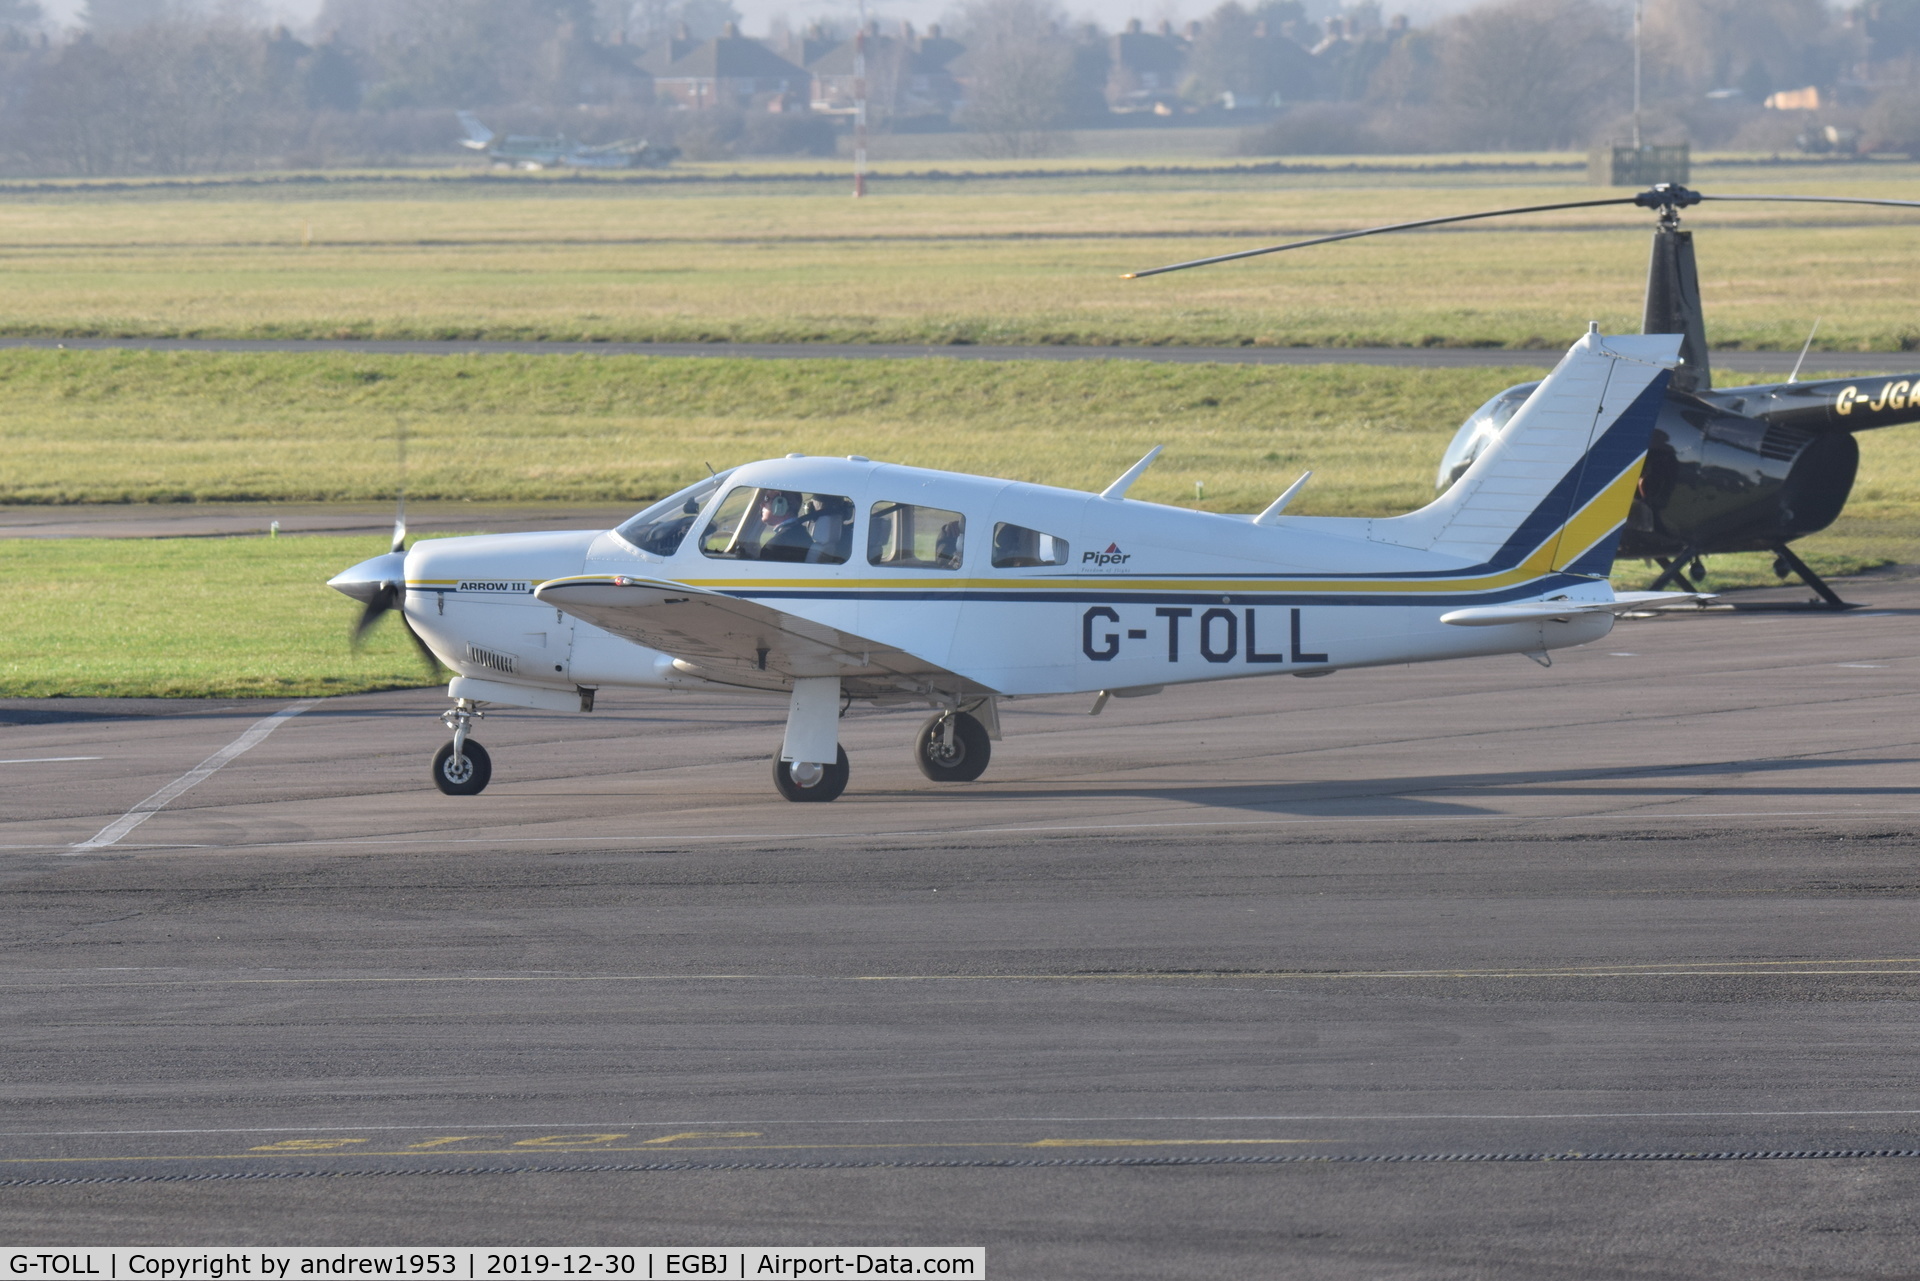 G-TOLL, 1977 Piper PA-28R-201 Cherokee Arrow III C/N 28R-7837025, G-TOLL at Gloucestershire Airport.